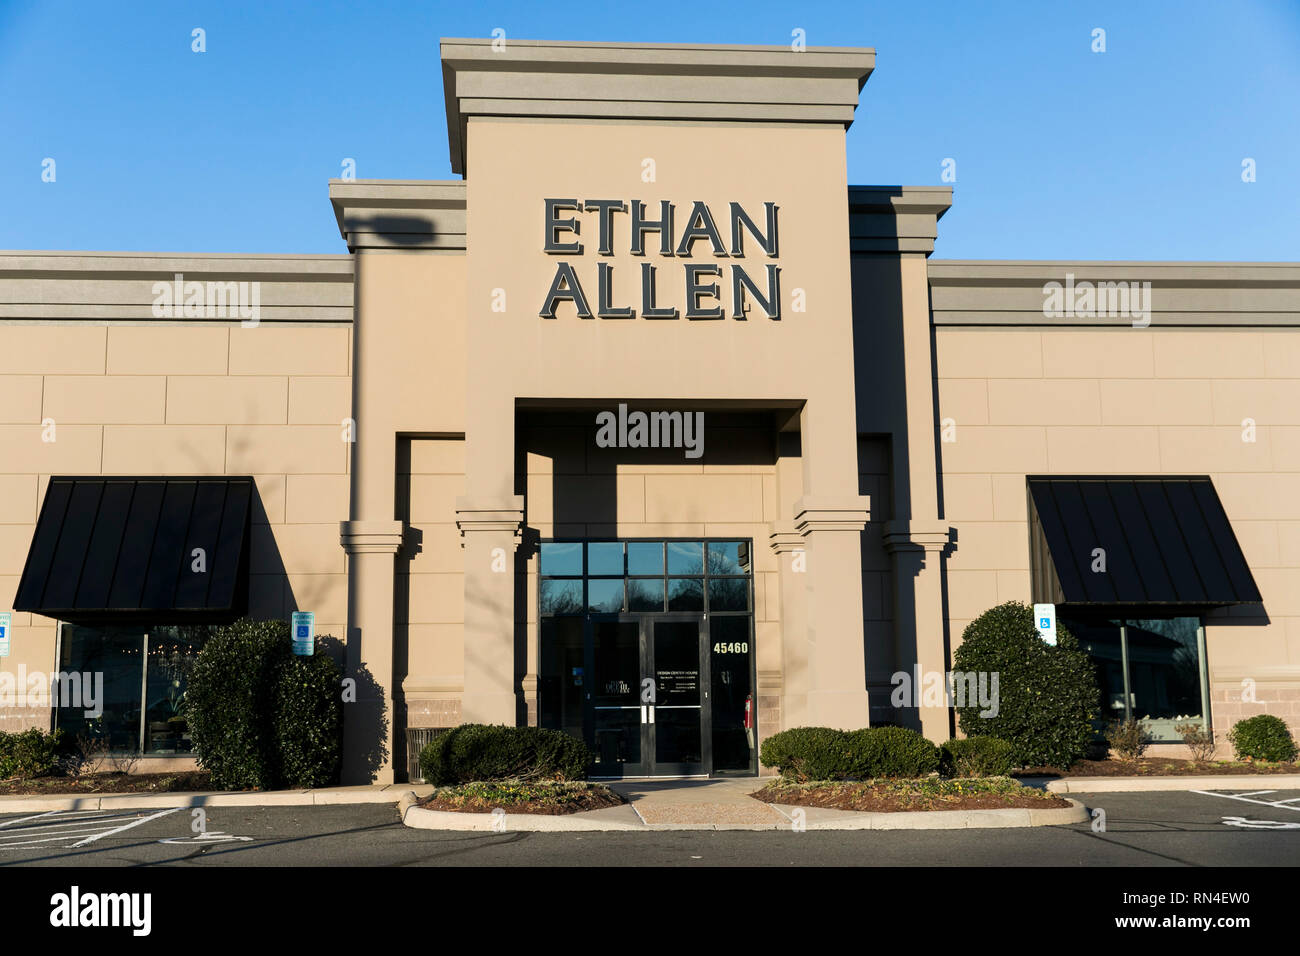 A logo sign outside of a Ethan Allen retail store location in Sterling, Virginia on February 14, 2019. Stock Photo